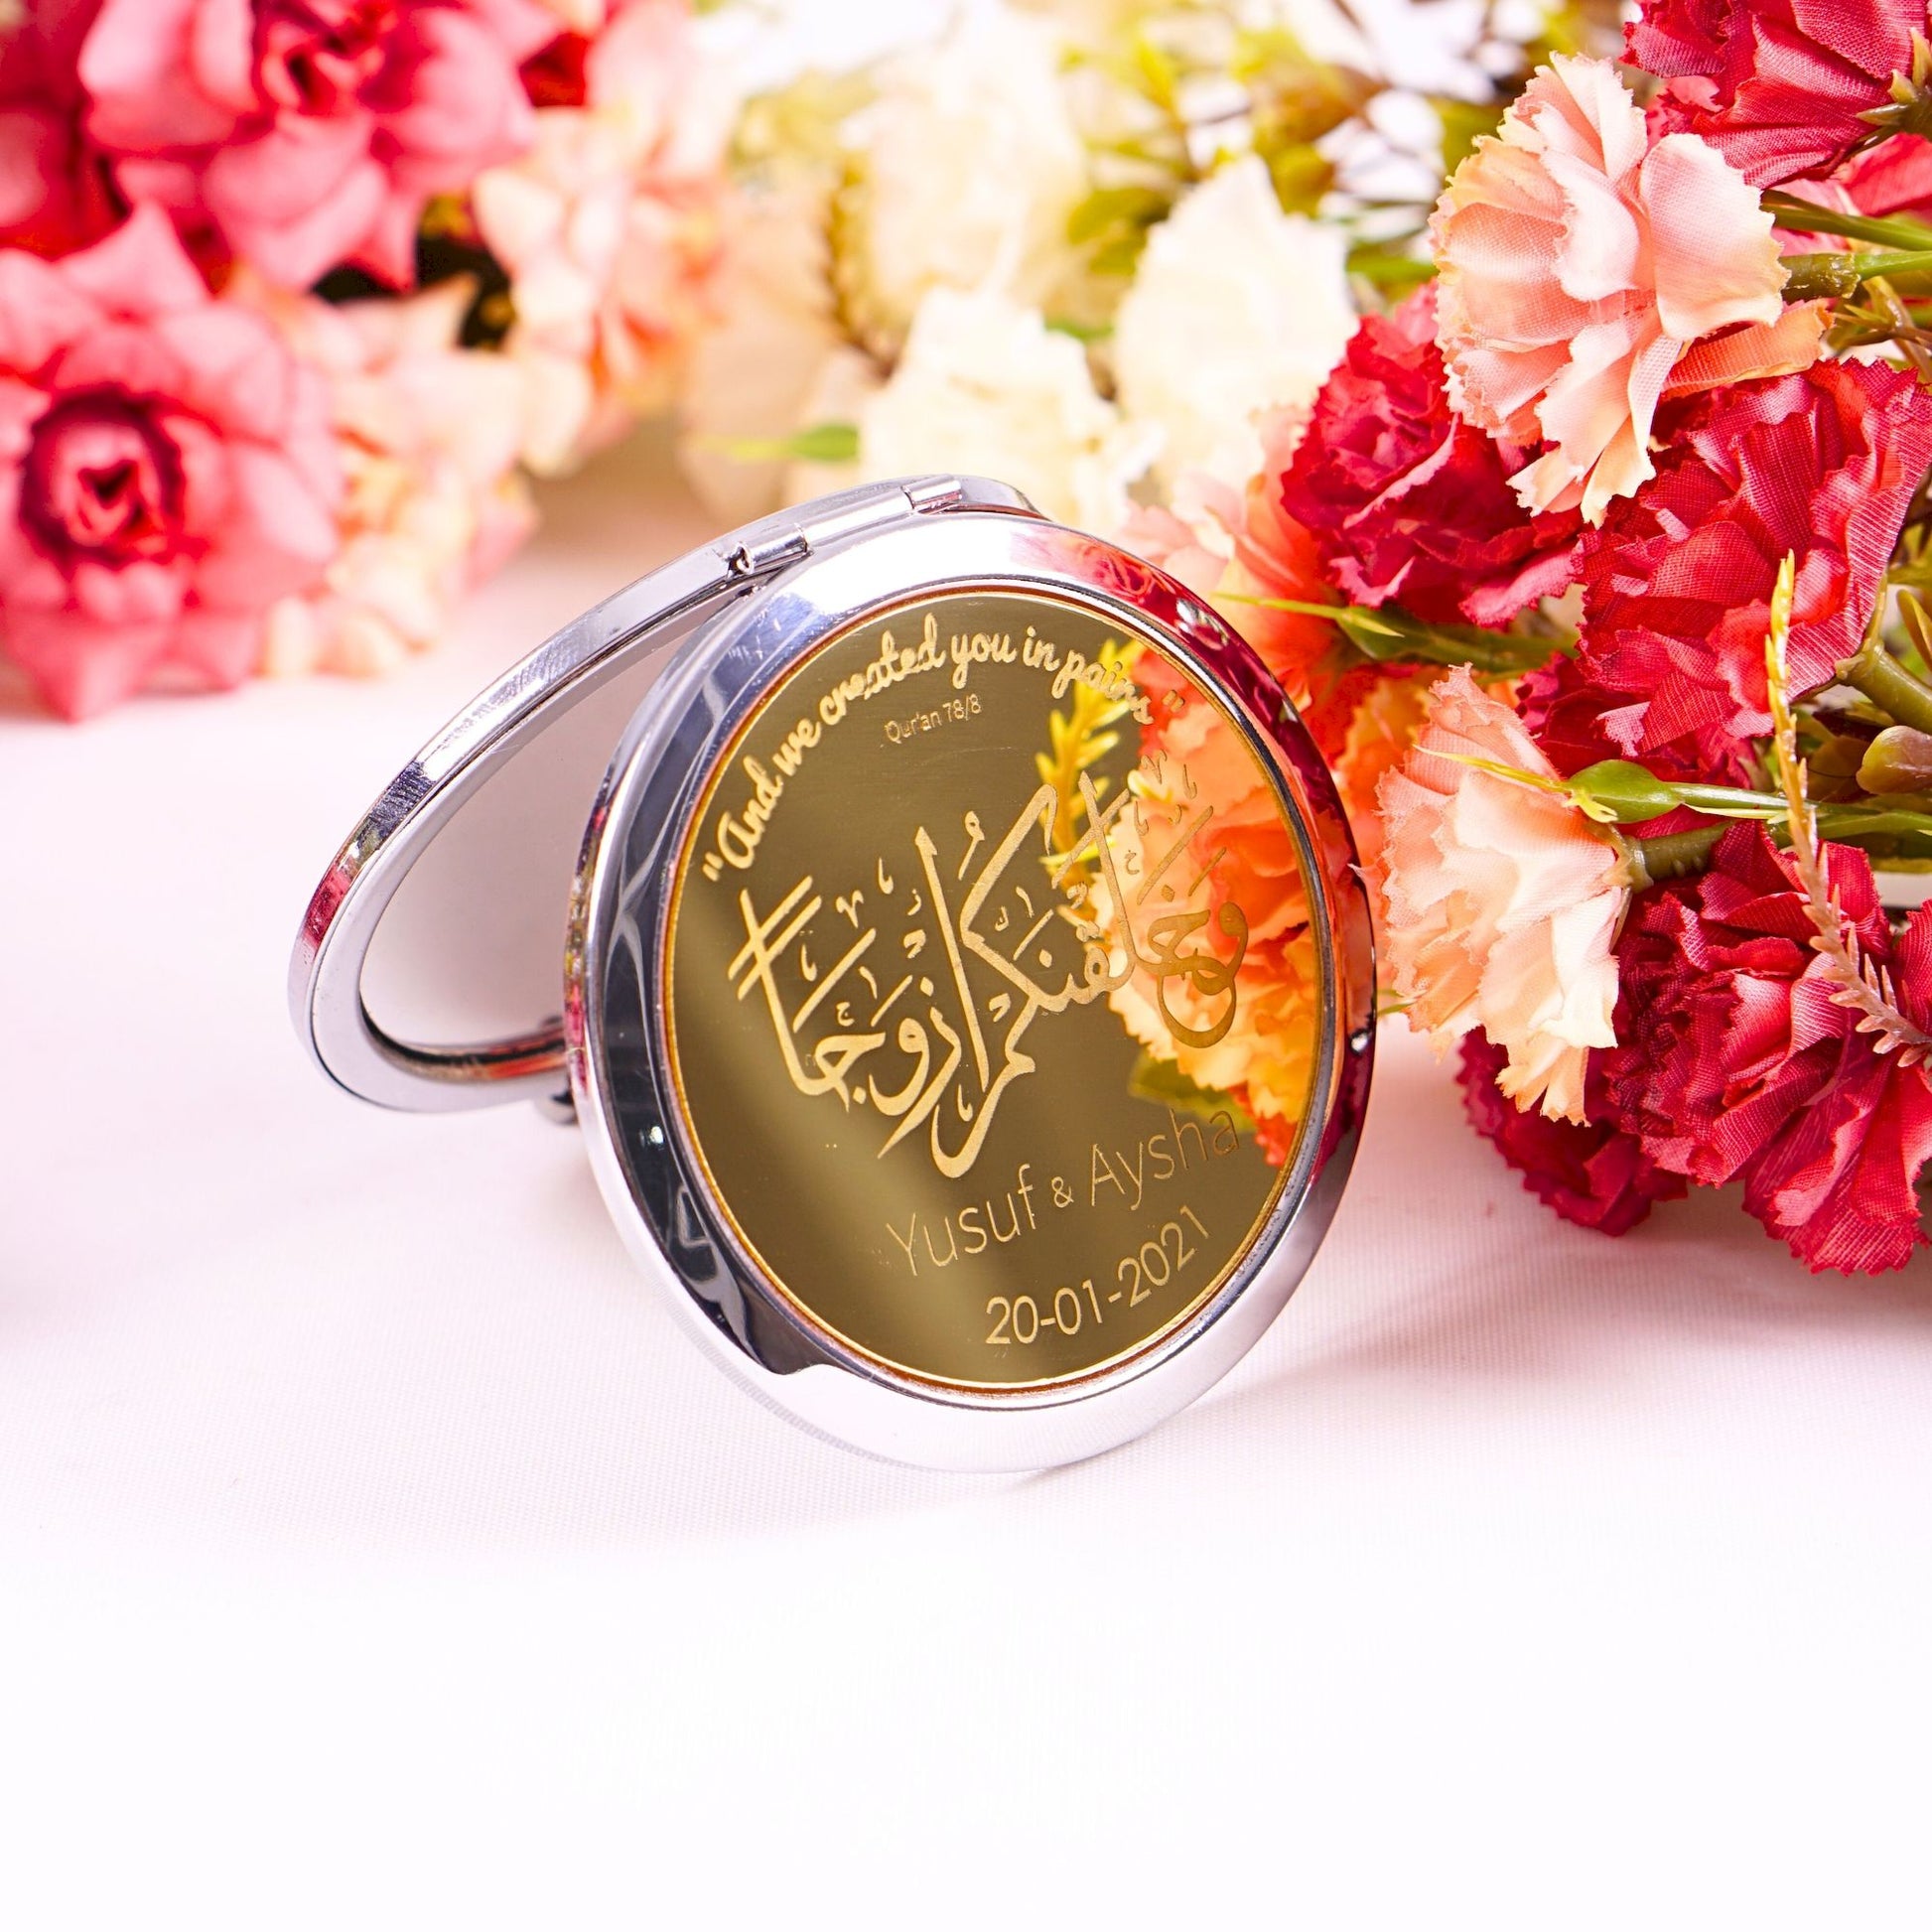 Personalized Wedding Favor Black Mini Makeup Mirror in Gift Box - Islamic Elite Favors is a handmade gift shop offering a wide variety of unique and personalized gifts for all occasions. Whether you're looking for the perfect Ramadan, Eid, Hajj, wedding gift or something special for a birthday, baby shower or anniversary, we have something for everyone. High quality, made with love.